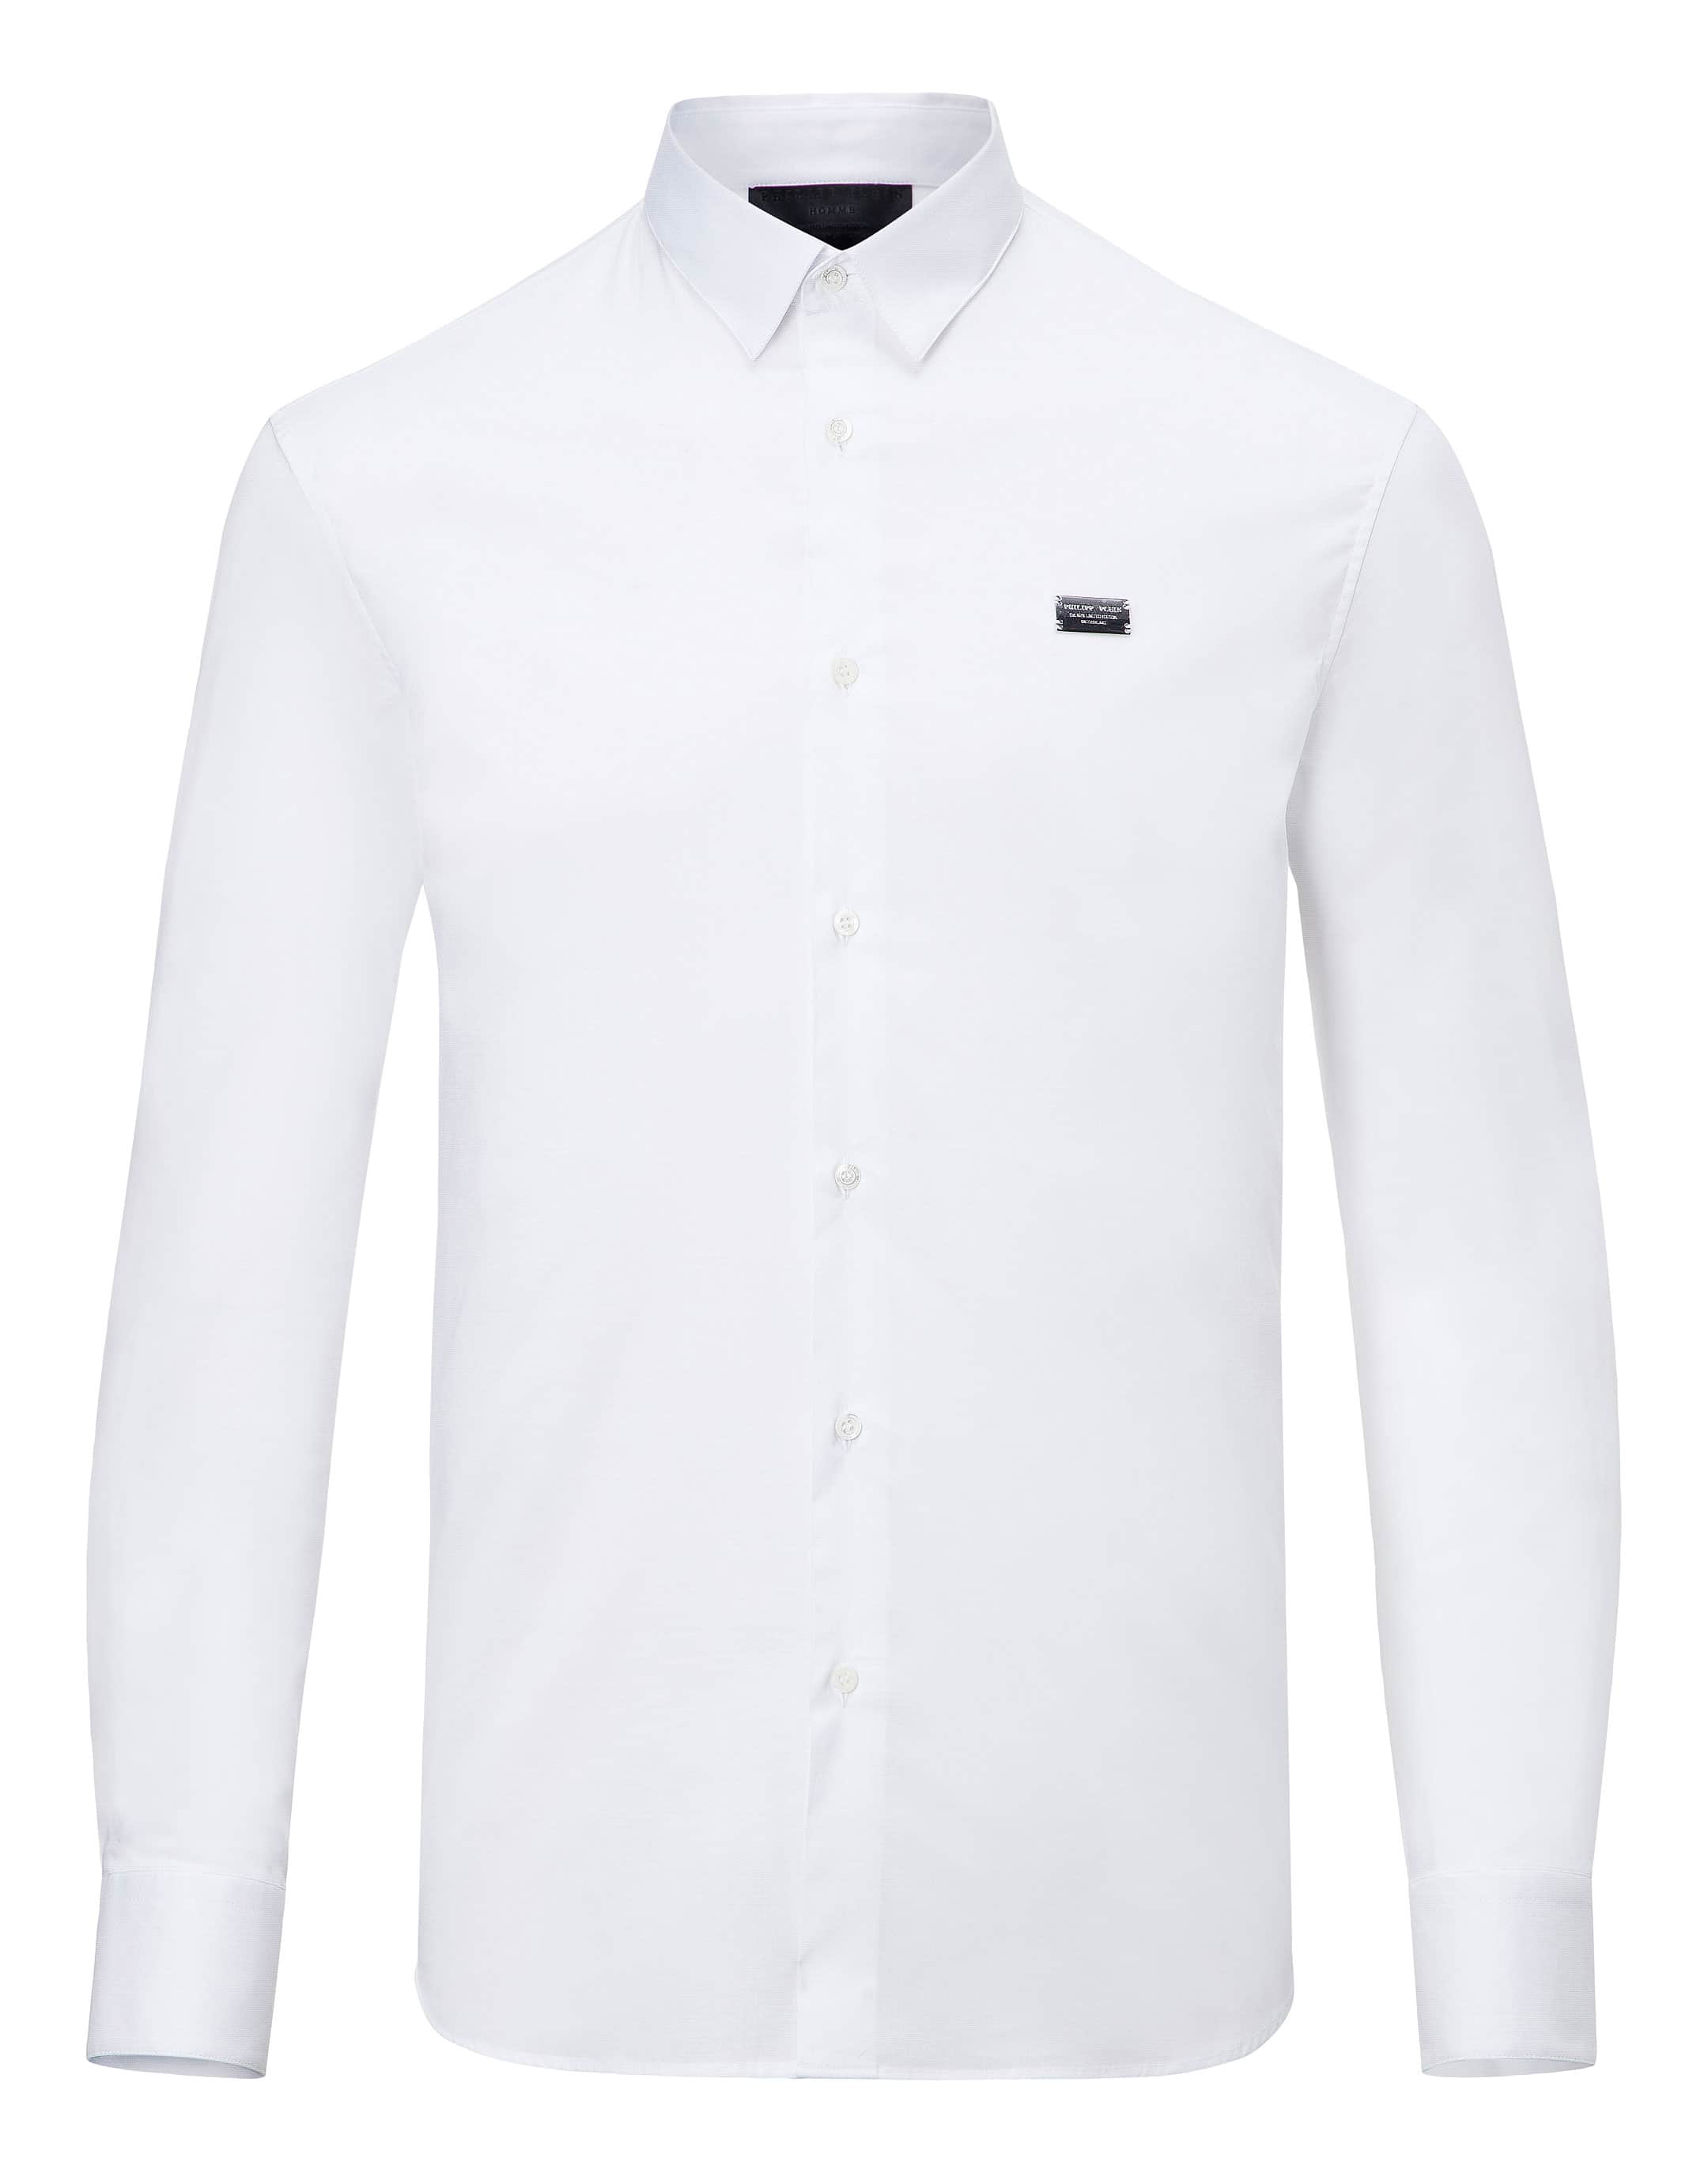 Carbon Series: White Sleeves — MST Merch